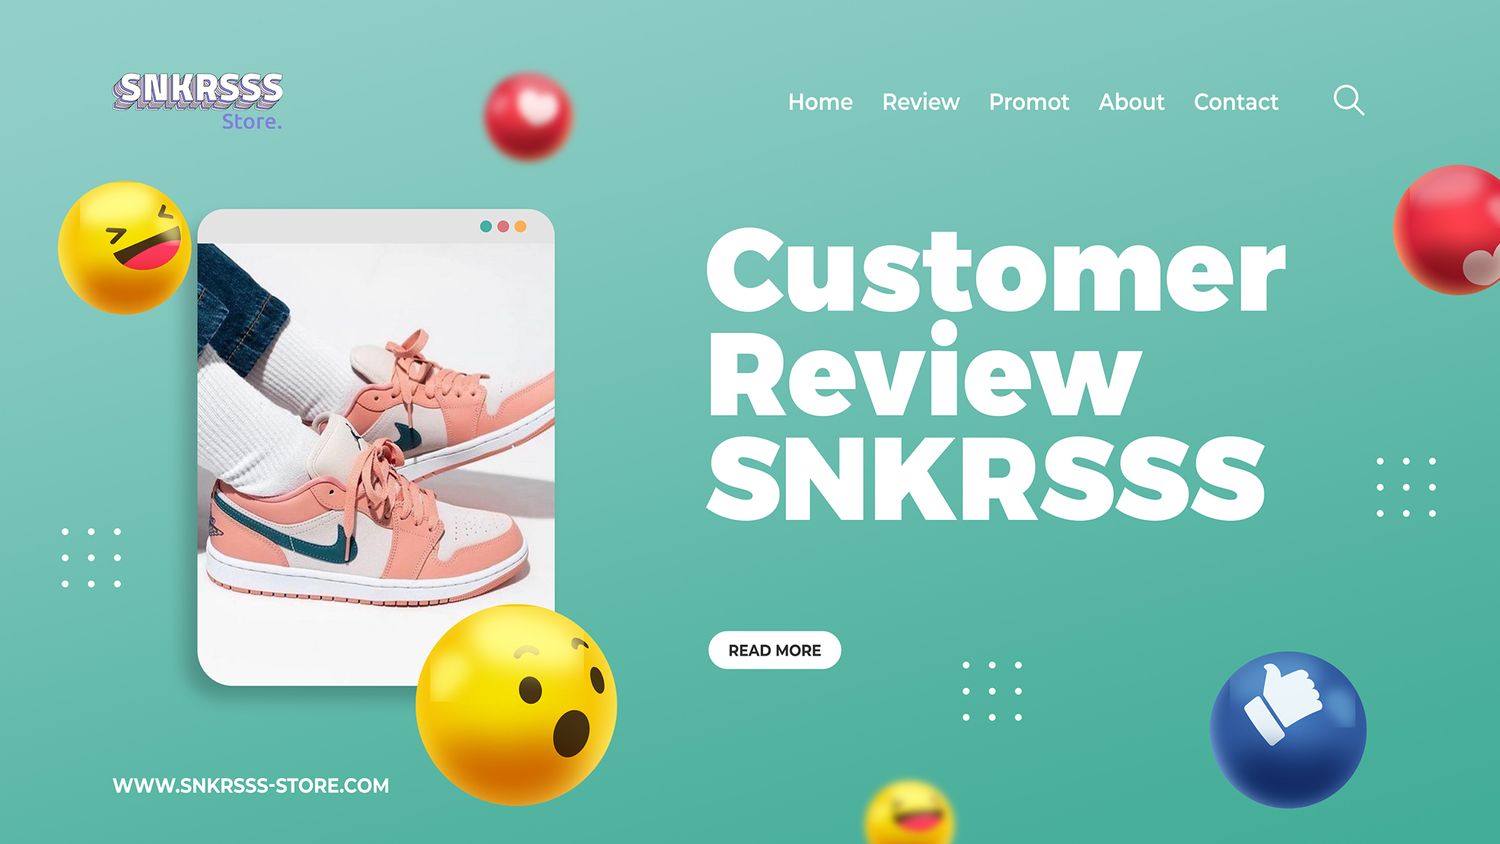 SNKRSSS Store - Customer Review